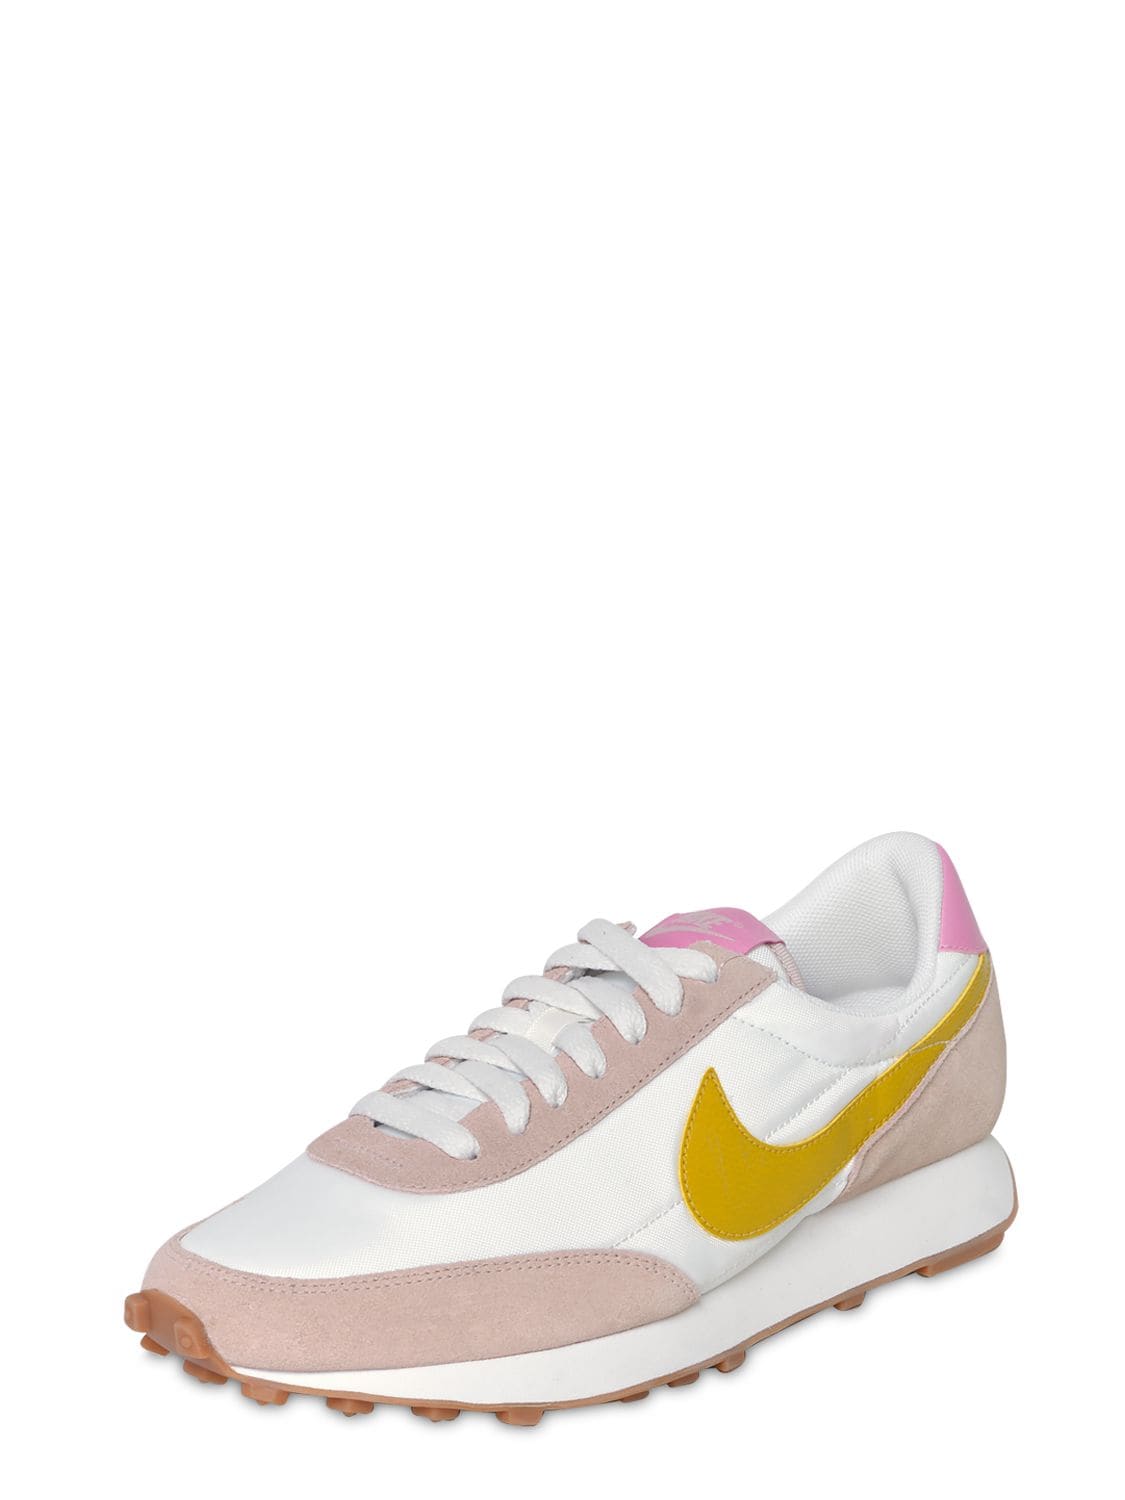 Nike Daybreak Shell, Suede And Leather Sneakers In Beige | ModeSens